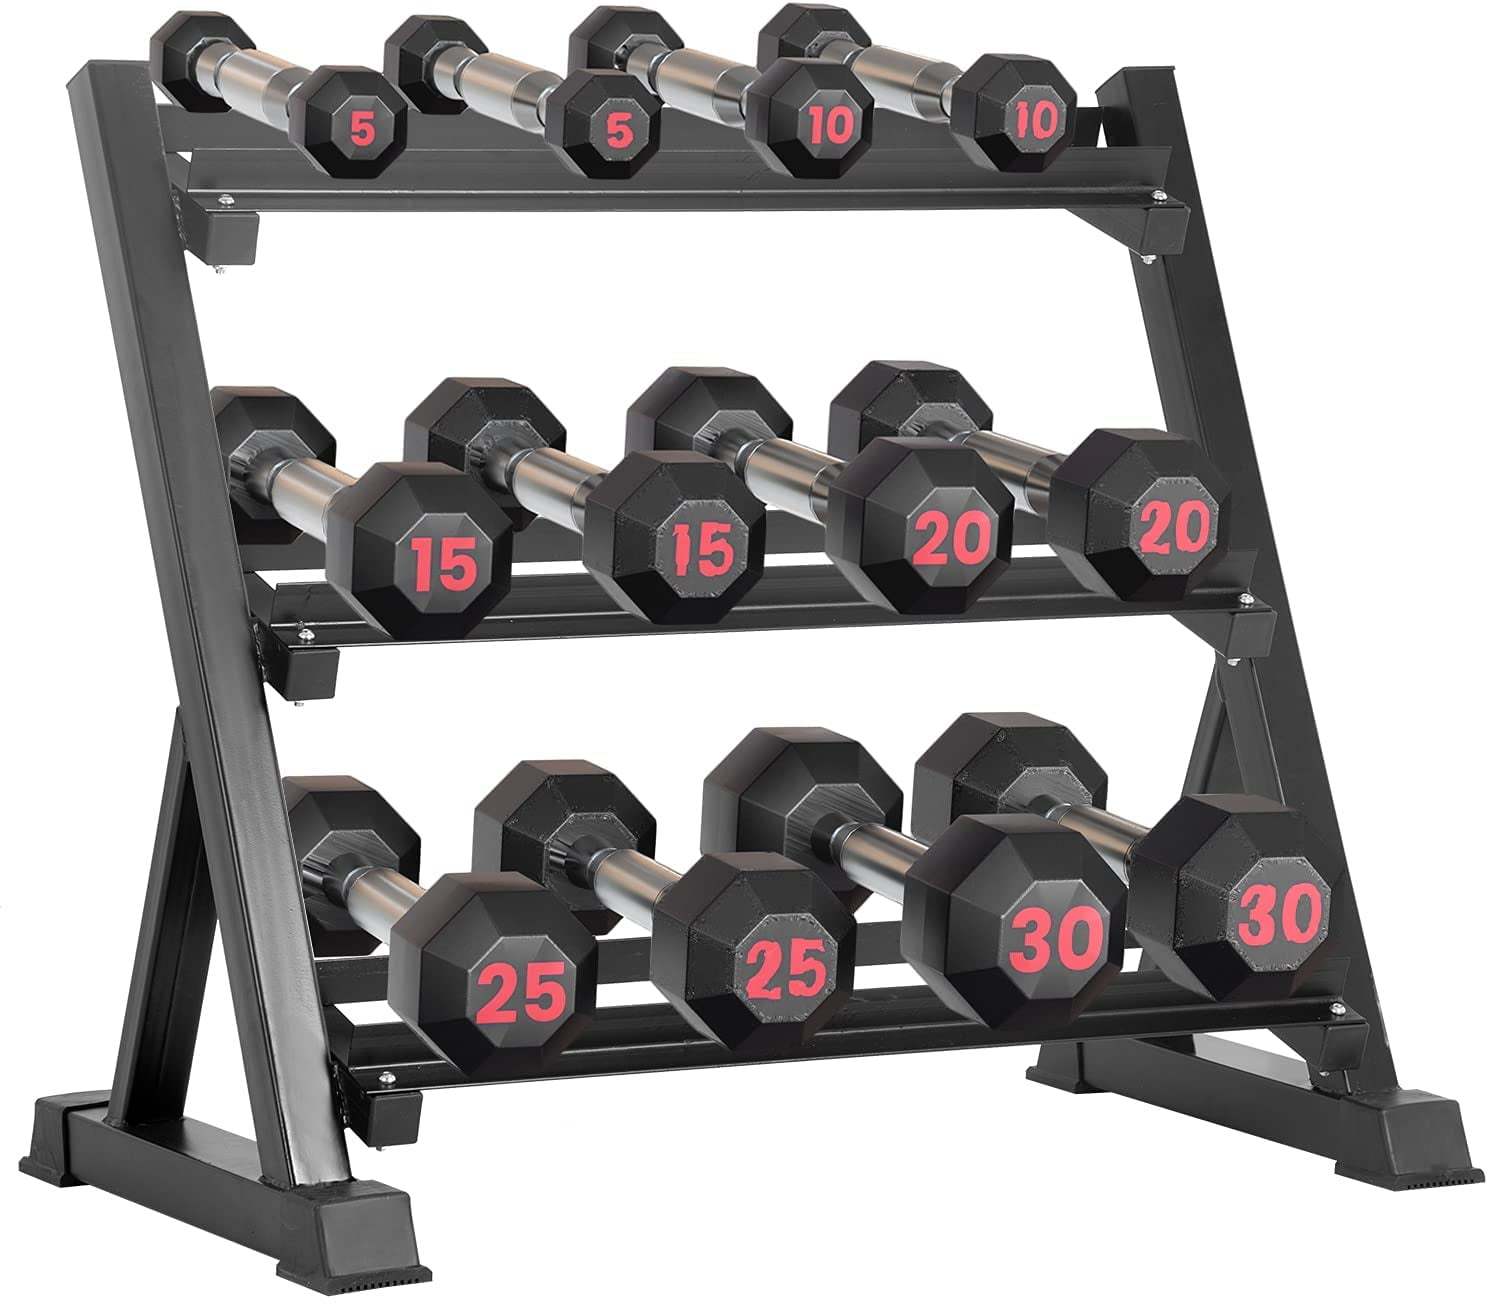 US 3-Tier Dumbbell Weight Lifting Rack Stand Tree Fitness Dumbell Holder Storage 